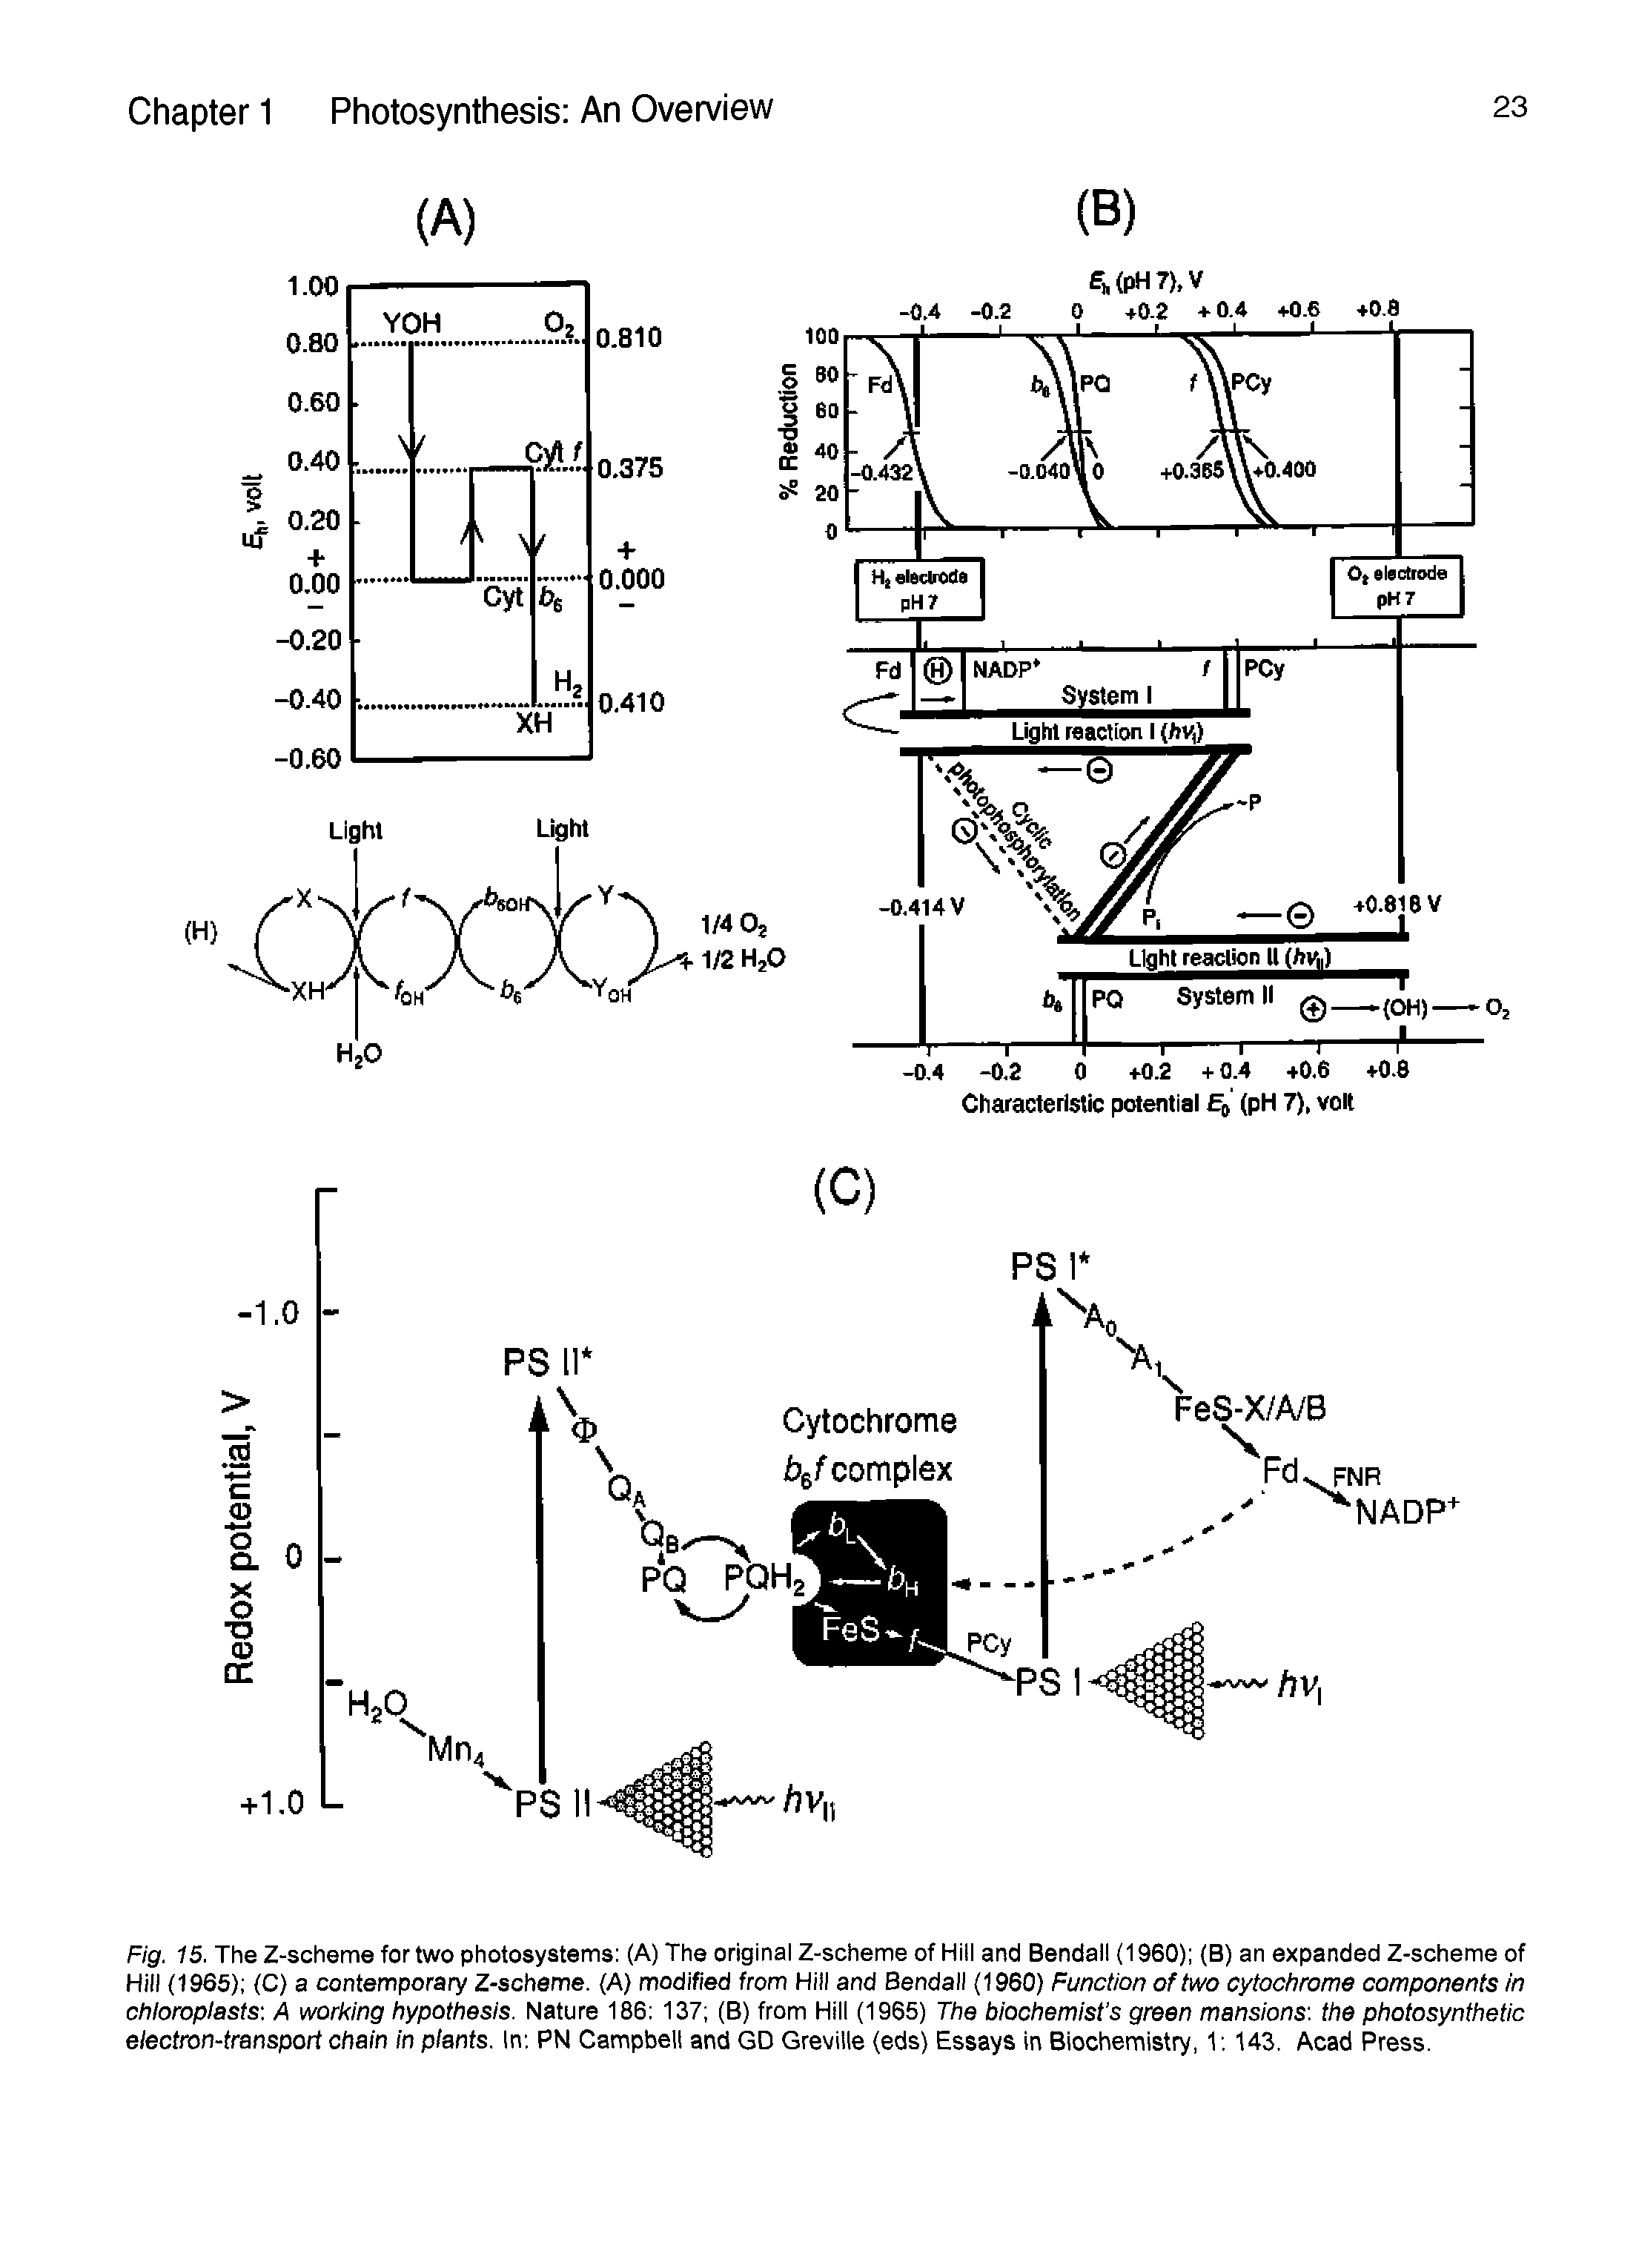 Fig. 15. The Z-scheme for two photosystems (A) The original Z-scheme of Hill and Bendall (1960) (B) an expanded Z-scheme of Hill (1965) (C) a contemporary Z-scheme. (A) modified from Hill and Bendall (1960) Function of two cytochrome components in chloroplasts A working hypothesis. Nature 186 137 (B) from Hill (1965) The biochemist s green mansions the photosynthetic electron-transport chain in plants. In PN Campbell and GD Greville (eds) Essays in Biochemistry, 1 143. Acad Press.